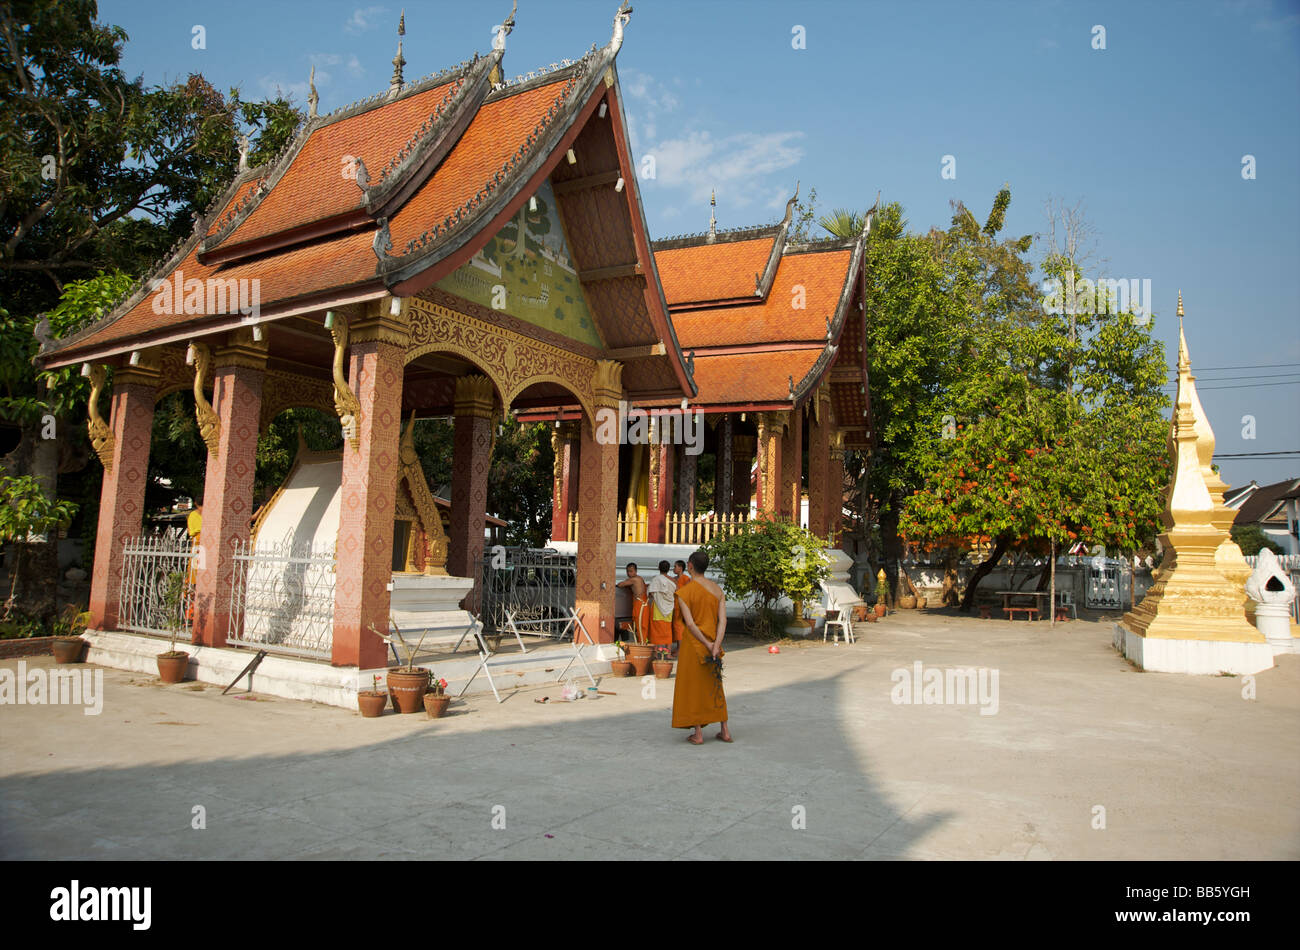 Monks go about their daily chores of temple cleaning and maintenance in their Buddhist temple Luang Prabang Laos Stock Photo